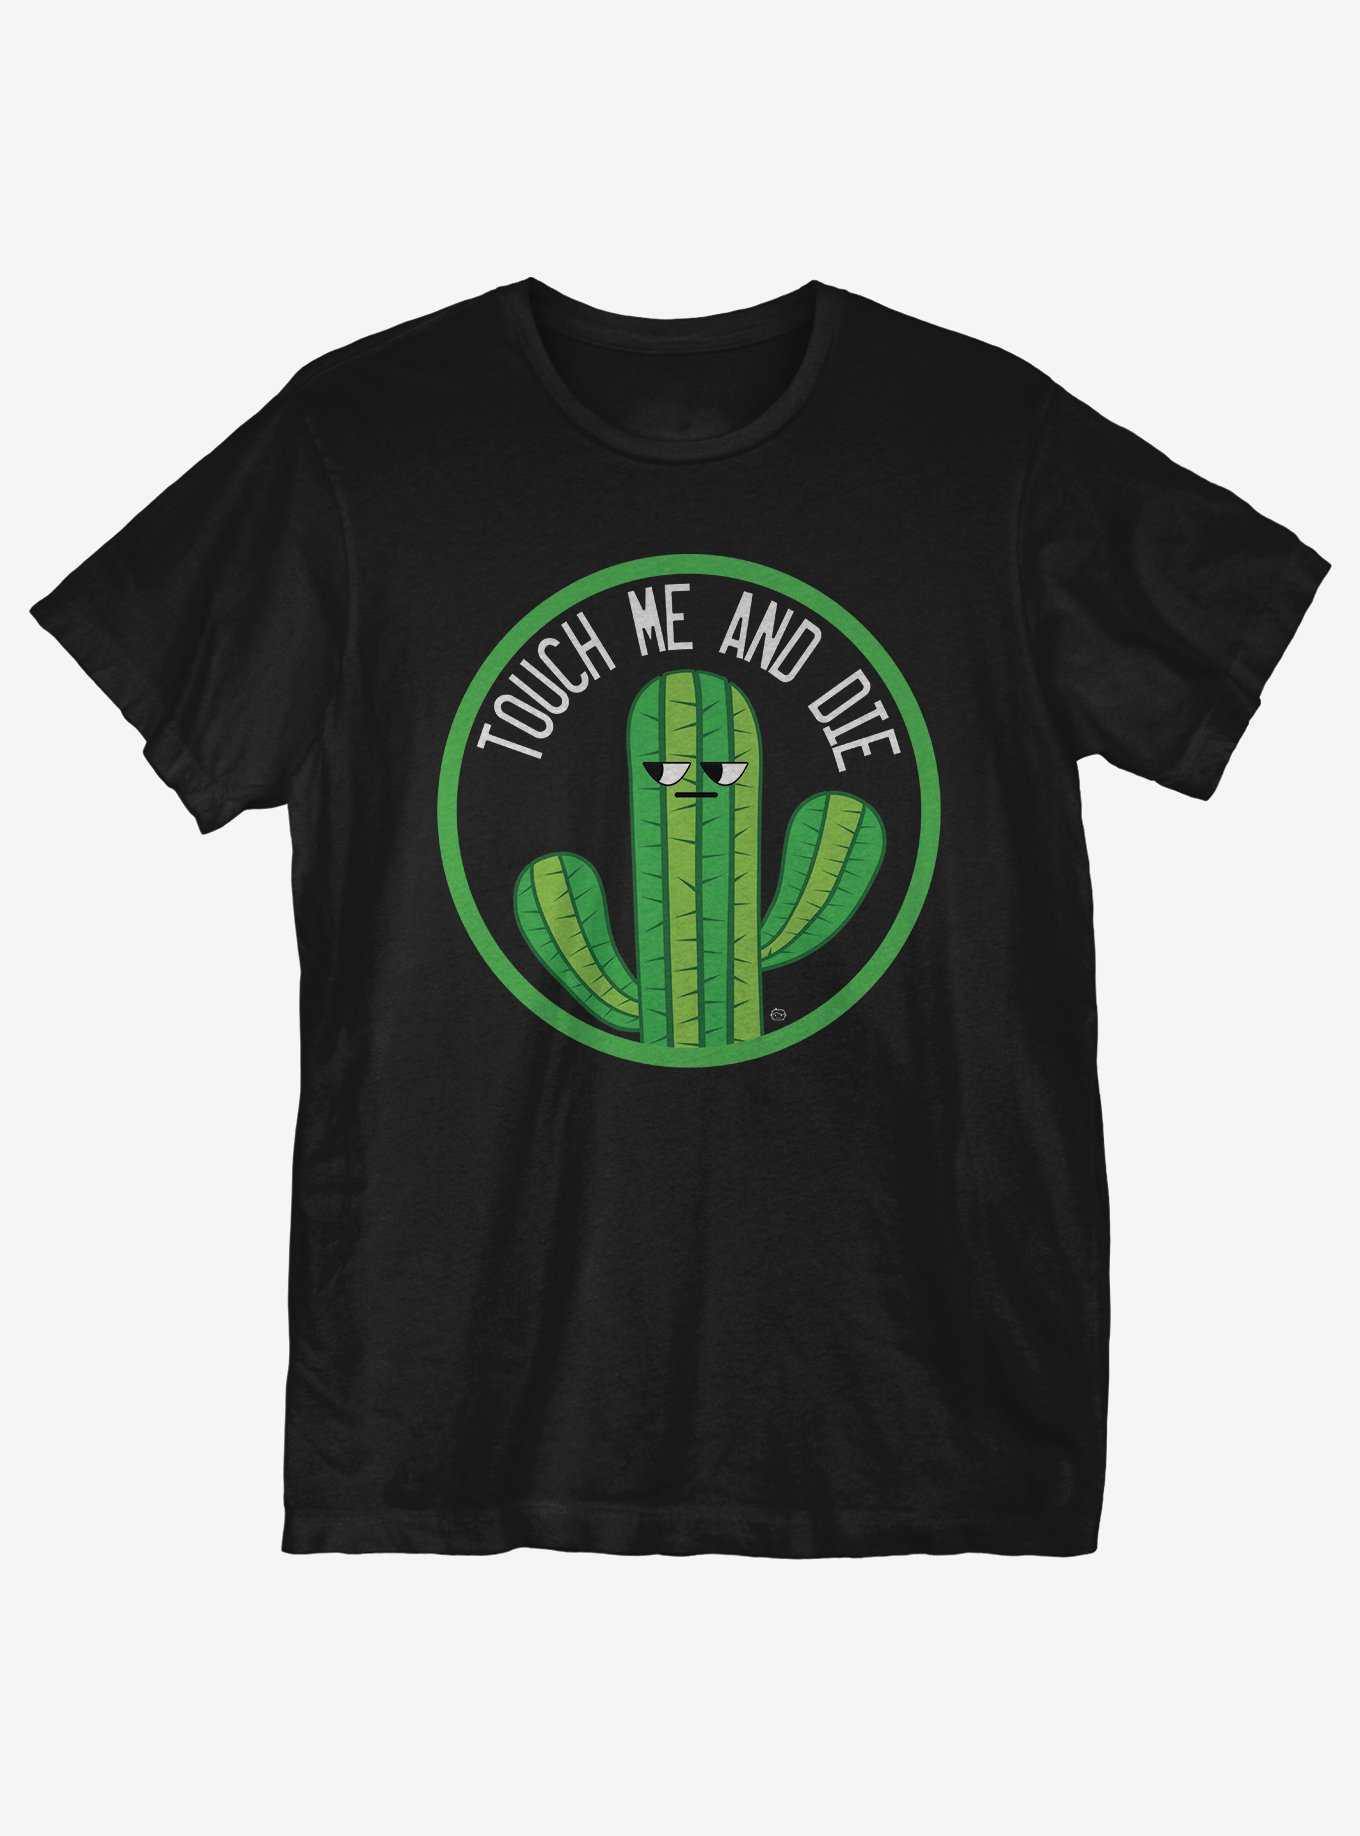 Touch Me And Die T-Shirt, , hi-res